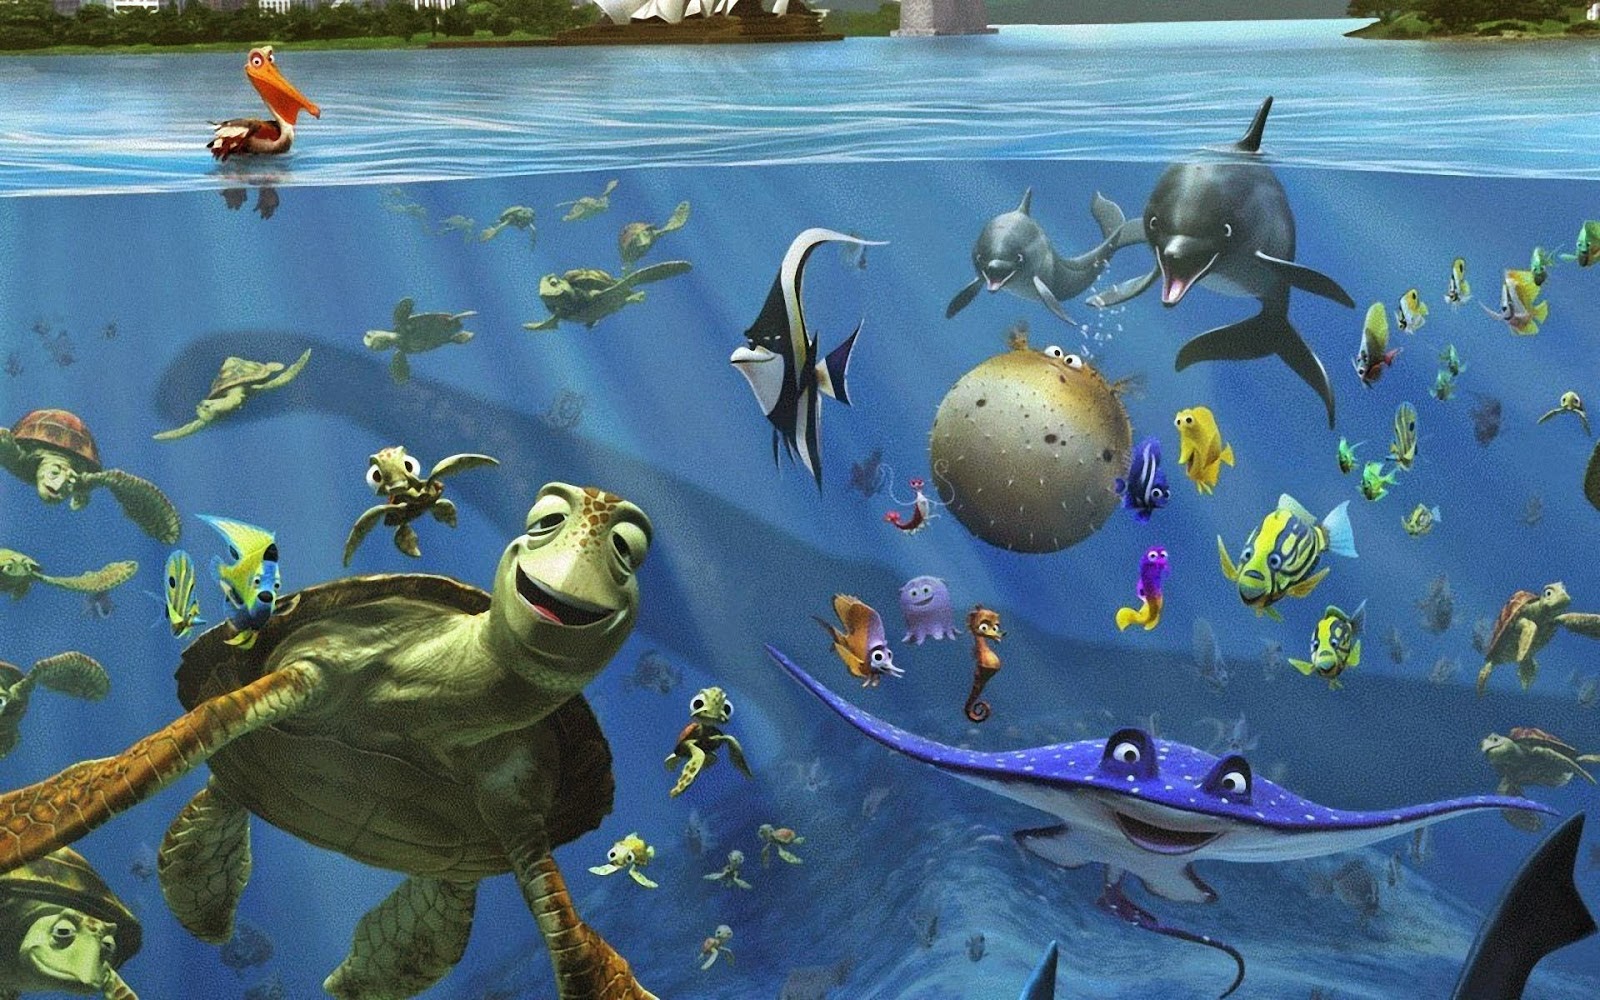 WALLPAPER ANDROID IPHONE Finding Nemo Wallpaper